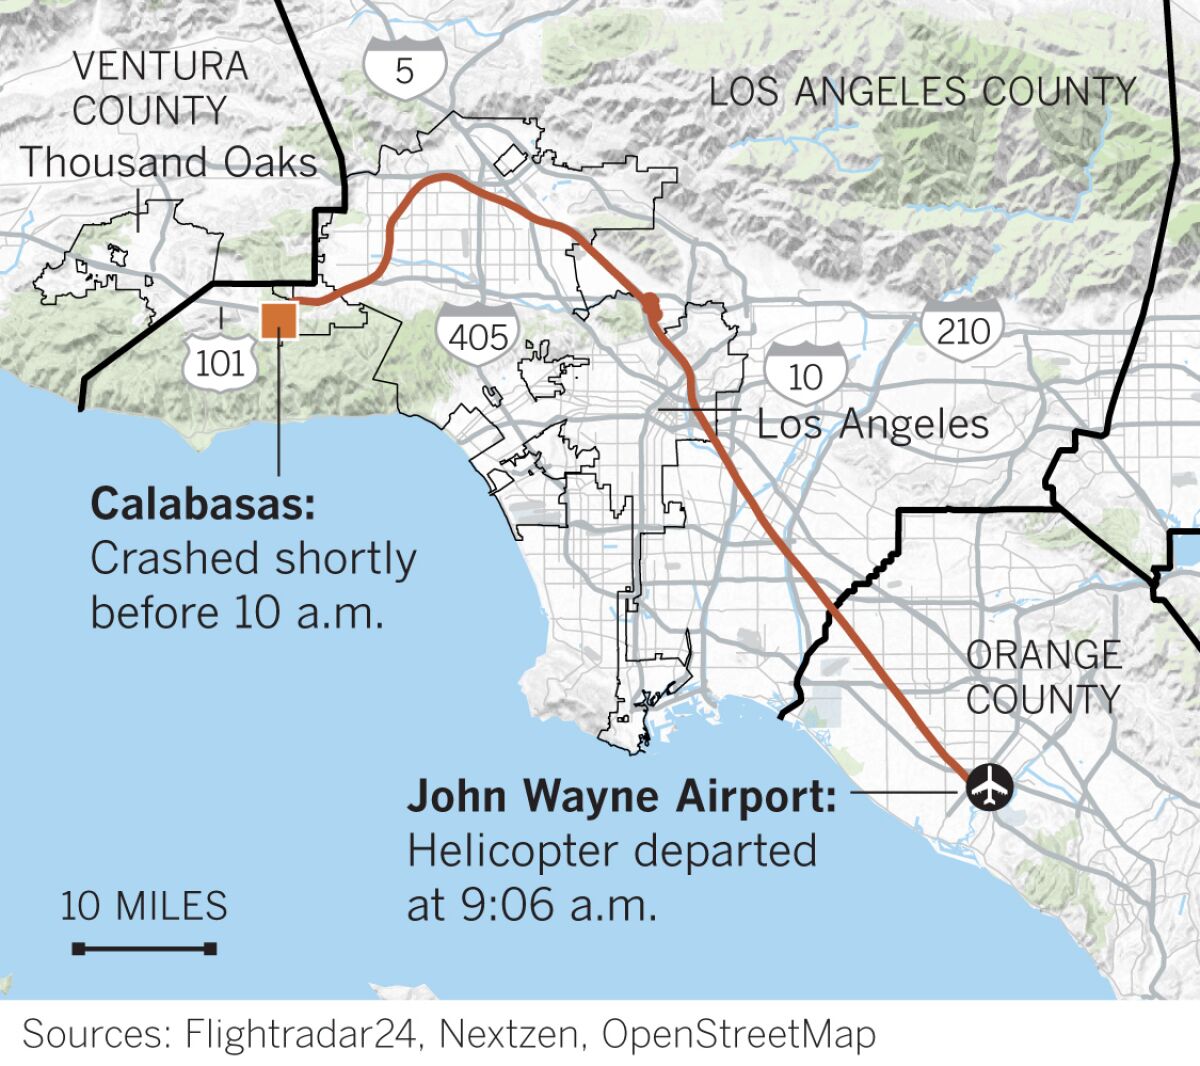 After taking off in Orange County, the helicopter flew northwest and then crashed shortly before 10 a.m. in Calabasas.